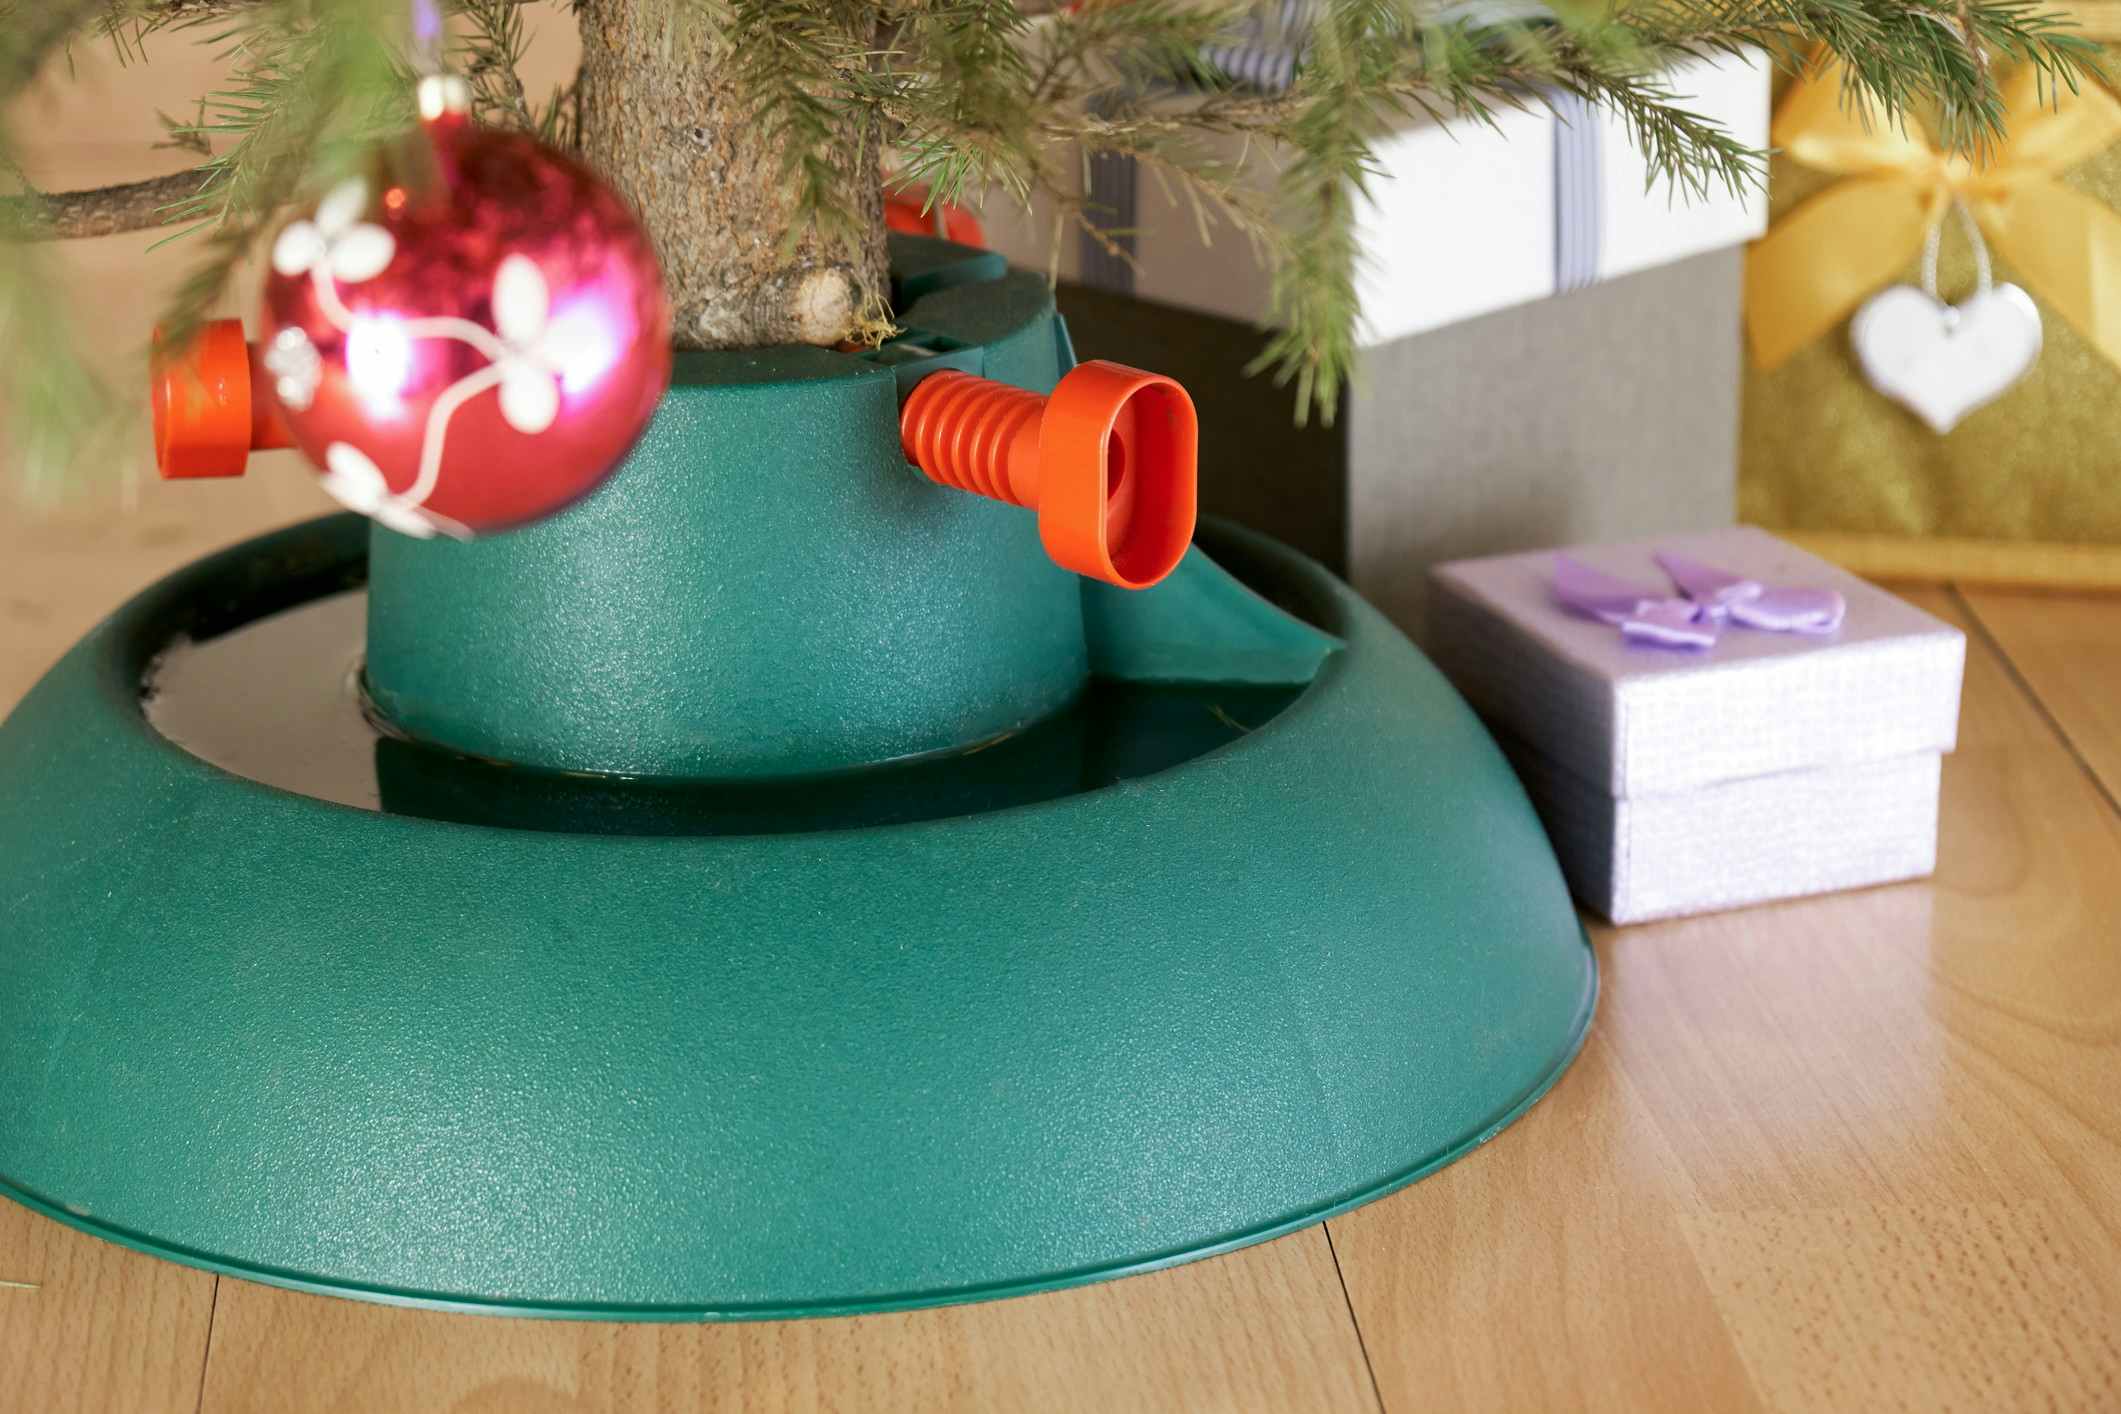 Plastic Christmas tree stand with poured water surrounded by gift boxes stands at home in New Year eve on the floor in city flat